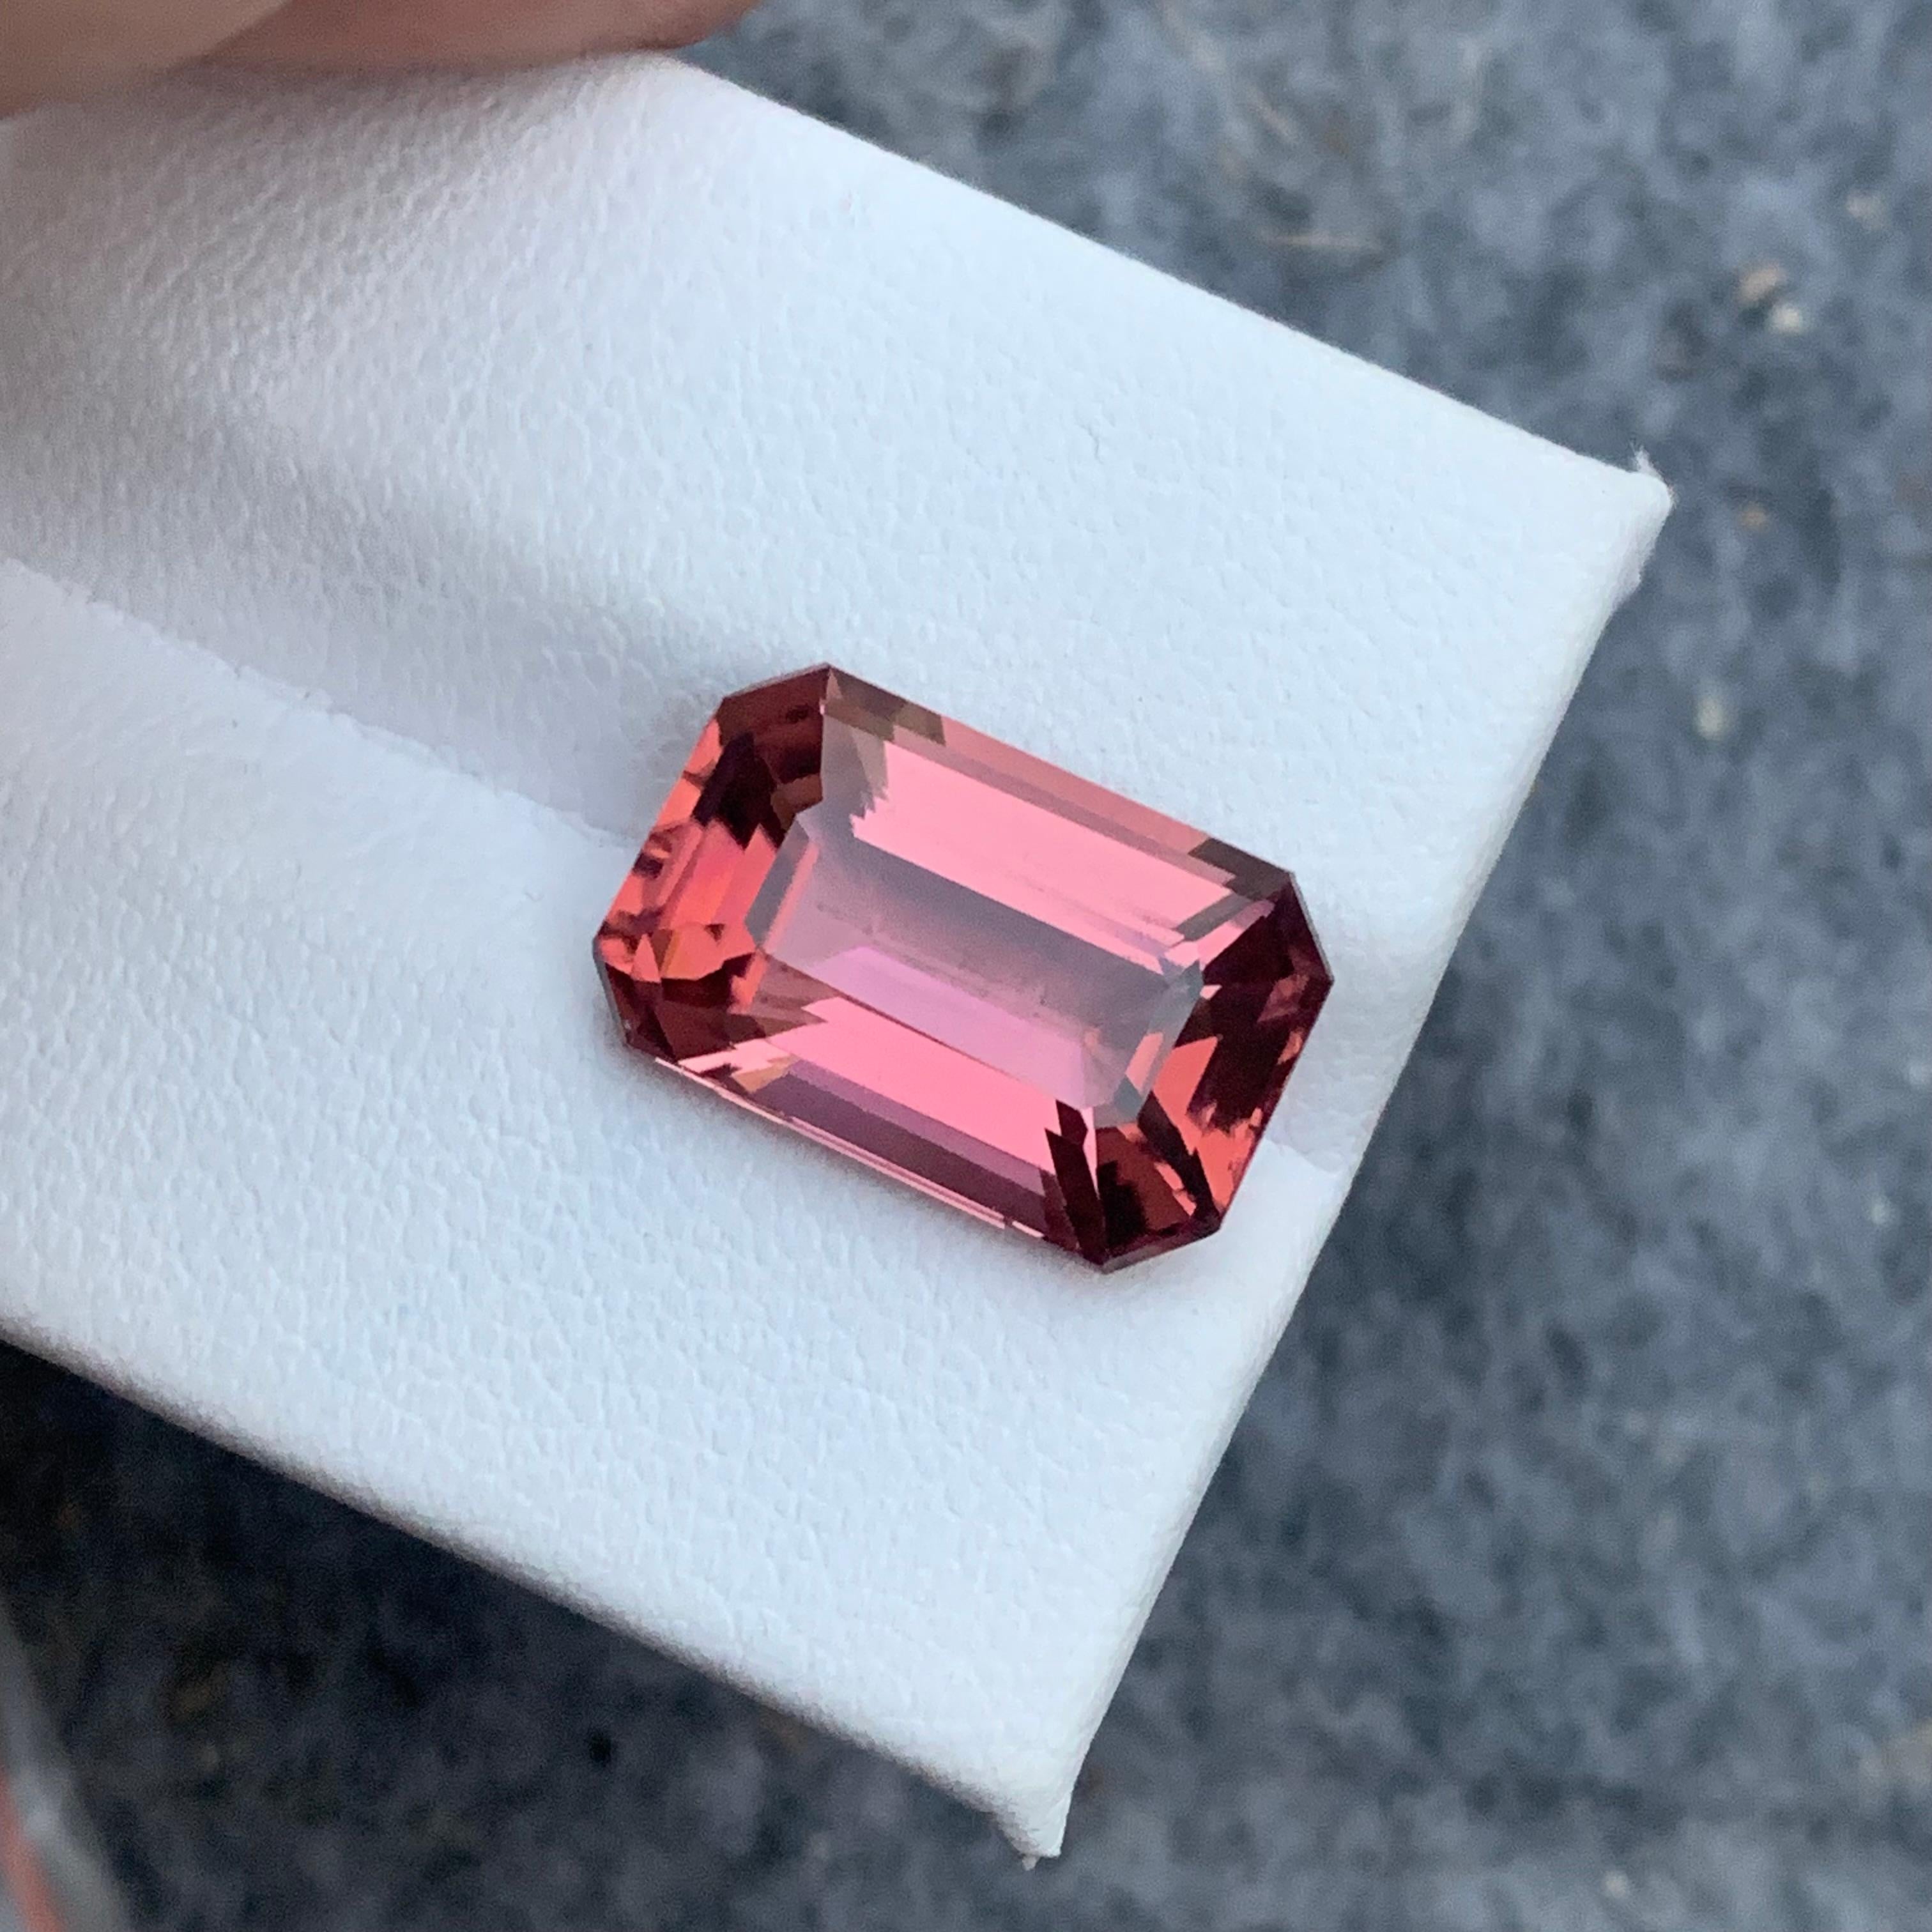 9.0 Carat AAA Quality Loose Soft Pink Tourmaline Emerald Cut From Afghanistan 5